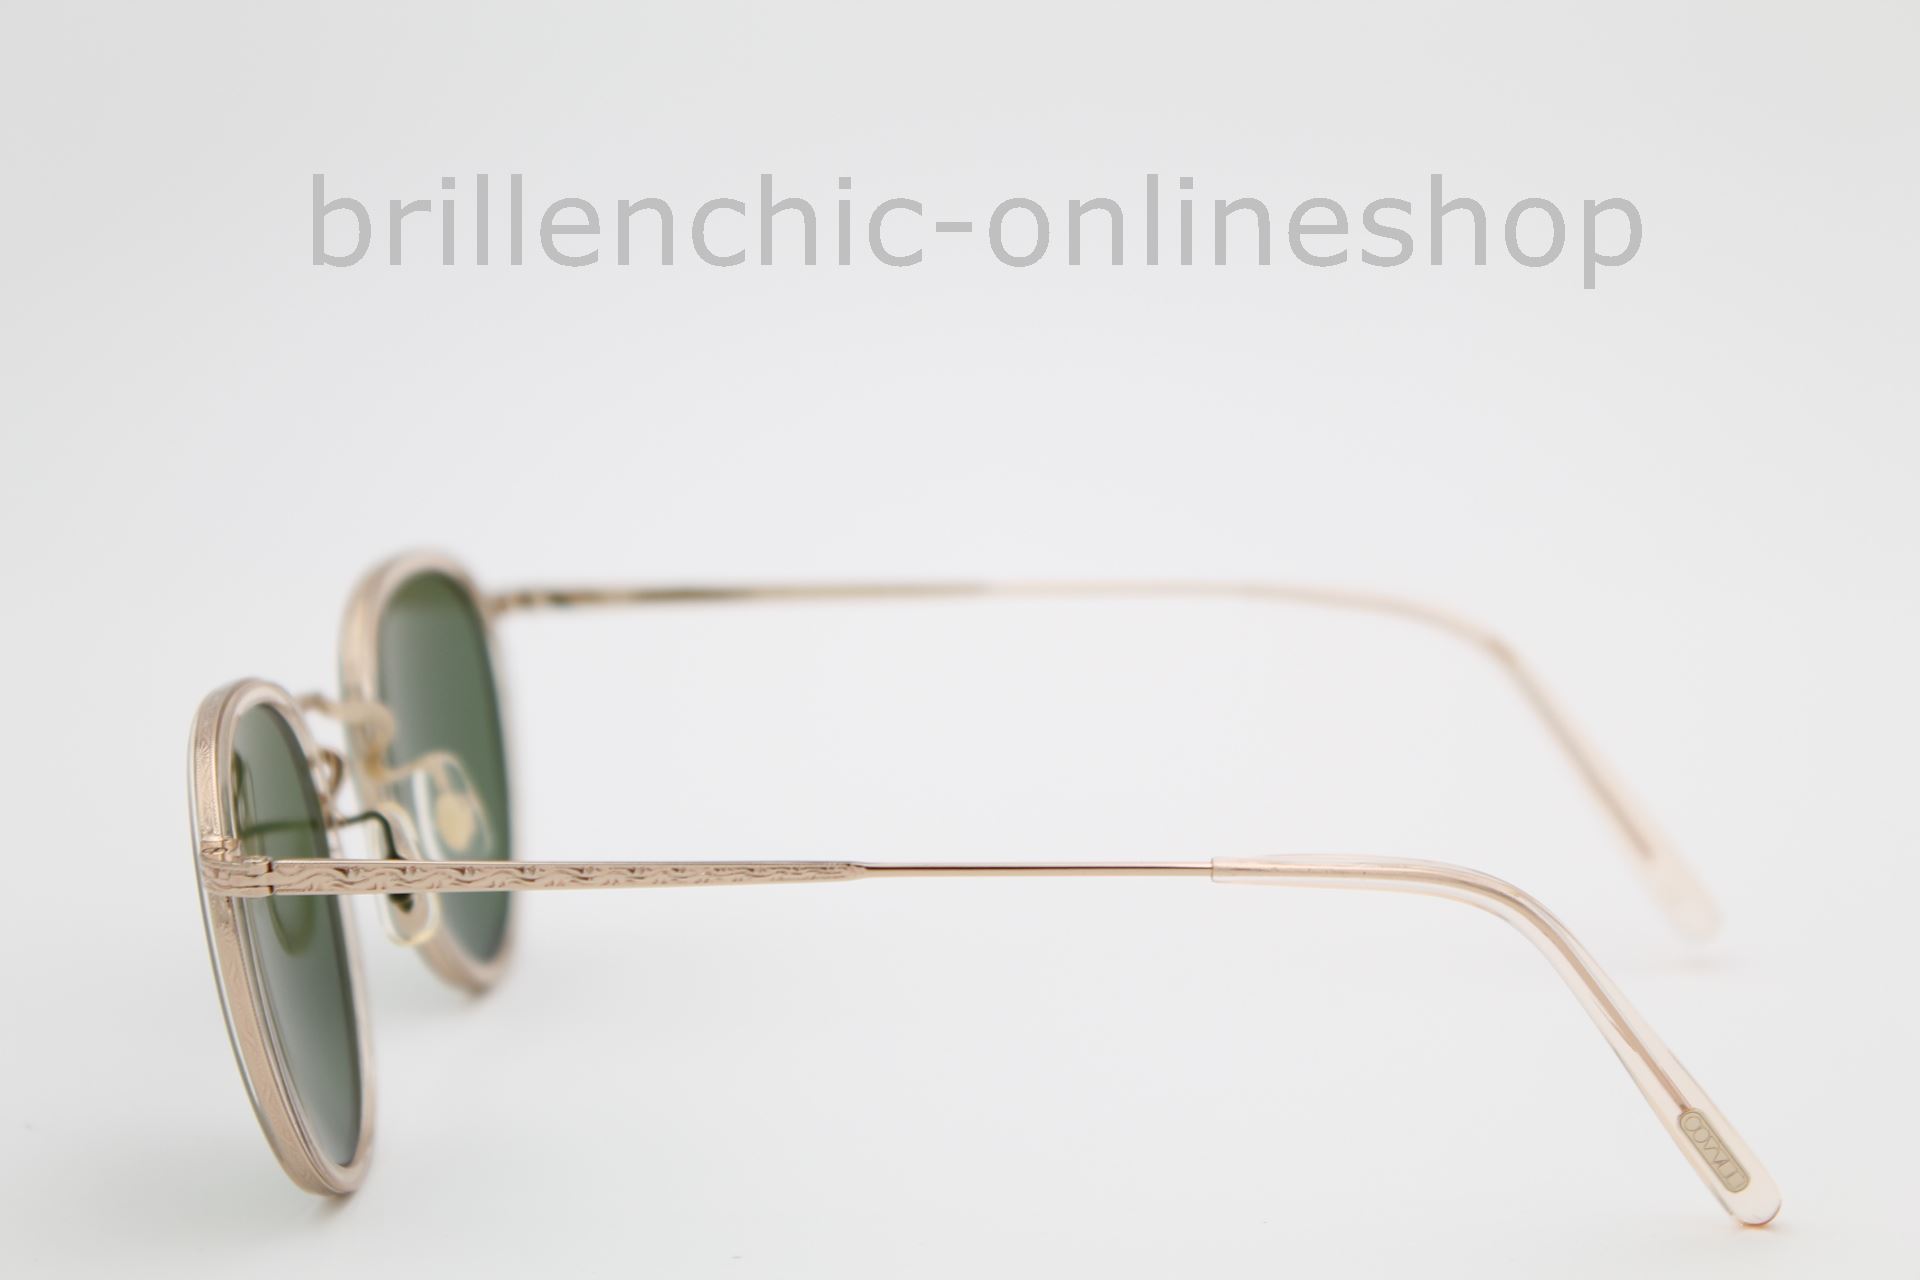 Brillenchic-onlineshop in Berlin - OLIVER PEOPLES MP-2 SUN OV 1104S 1104  5145/52 